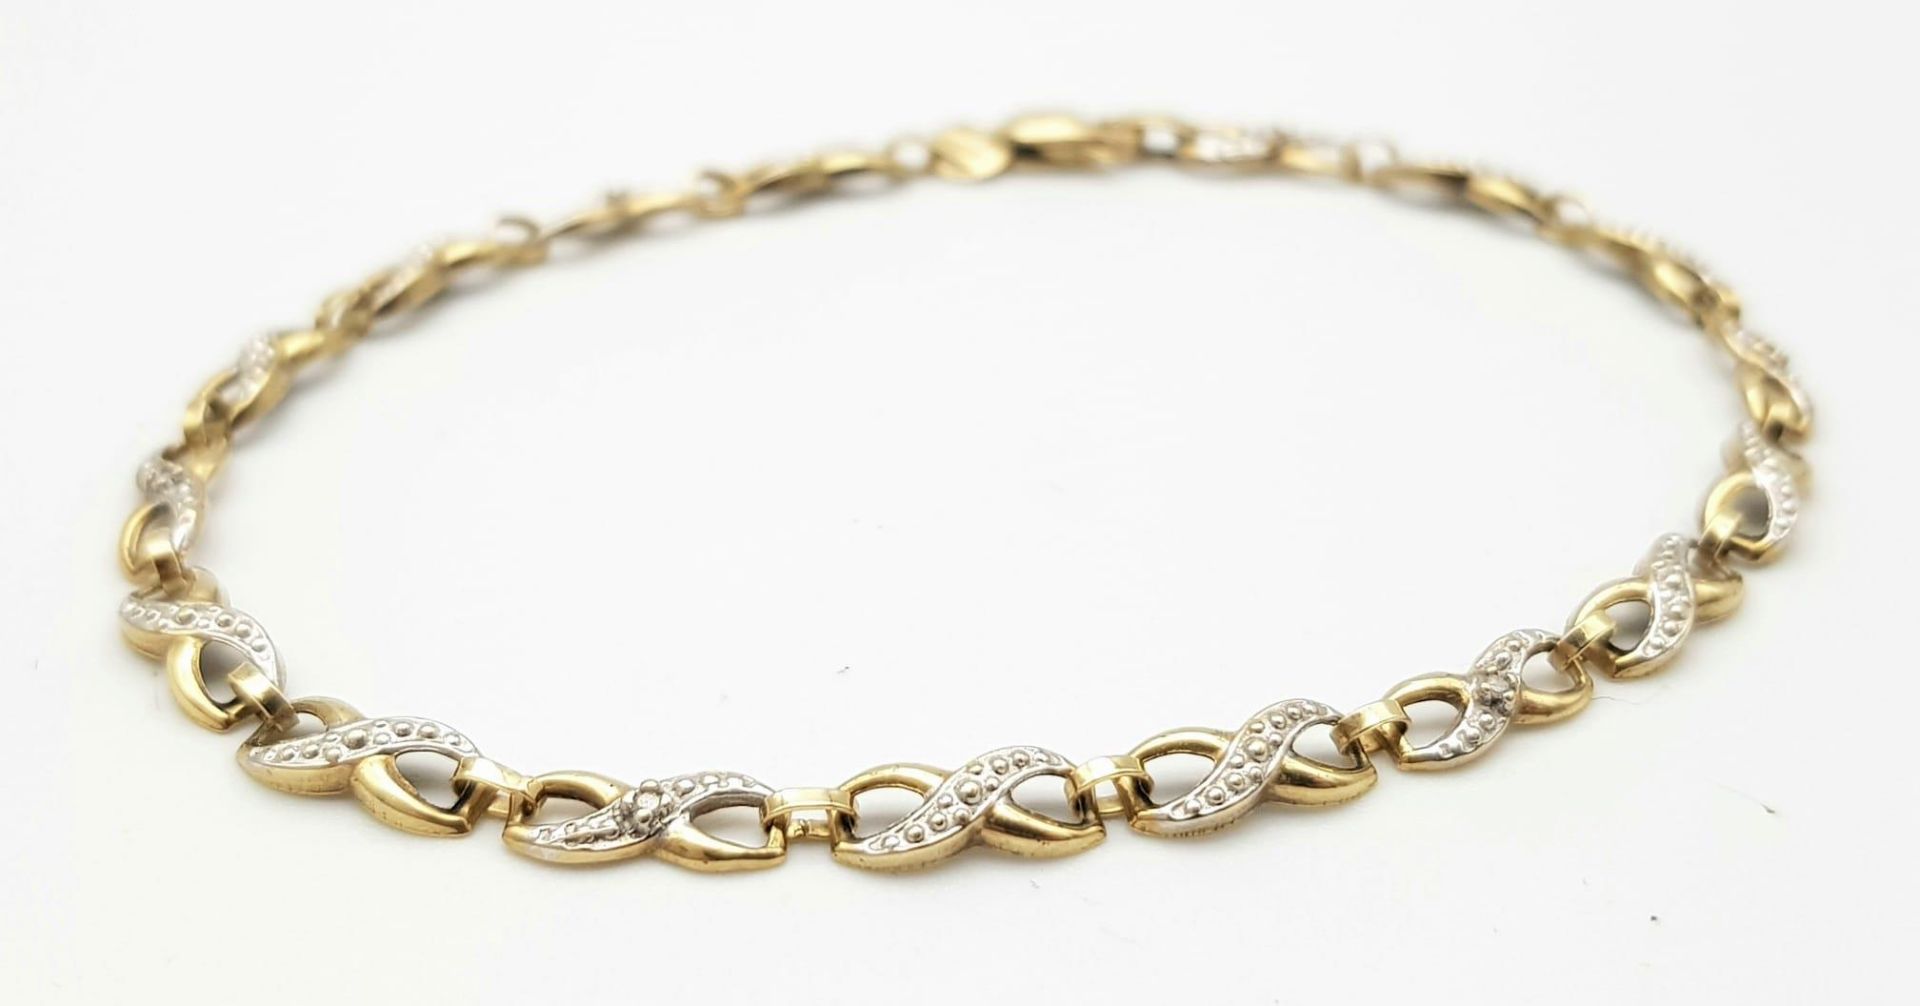 A Vintage 9K Yellow Gold and Diamond Spacer Crossover Link Bracelet. 18cm length. 2.37g total - Image 2 of 4